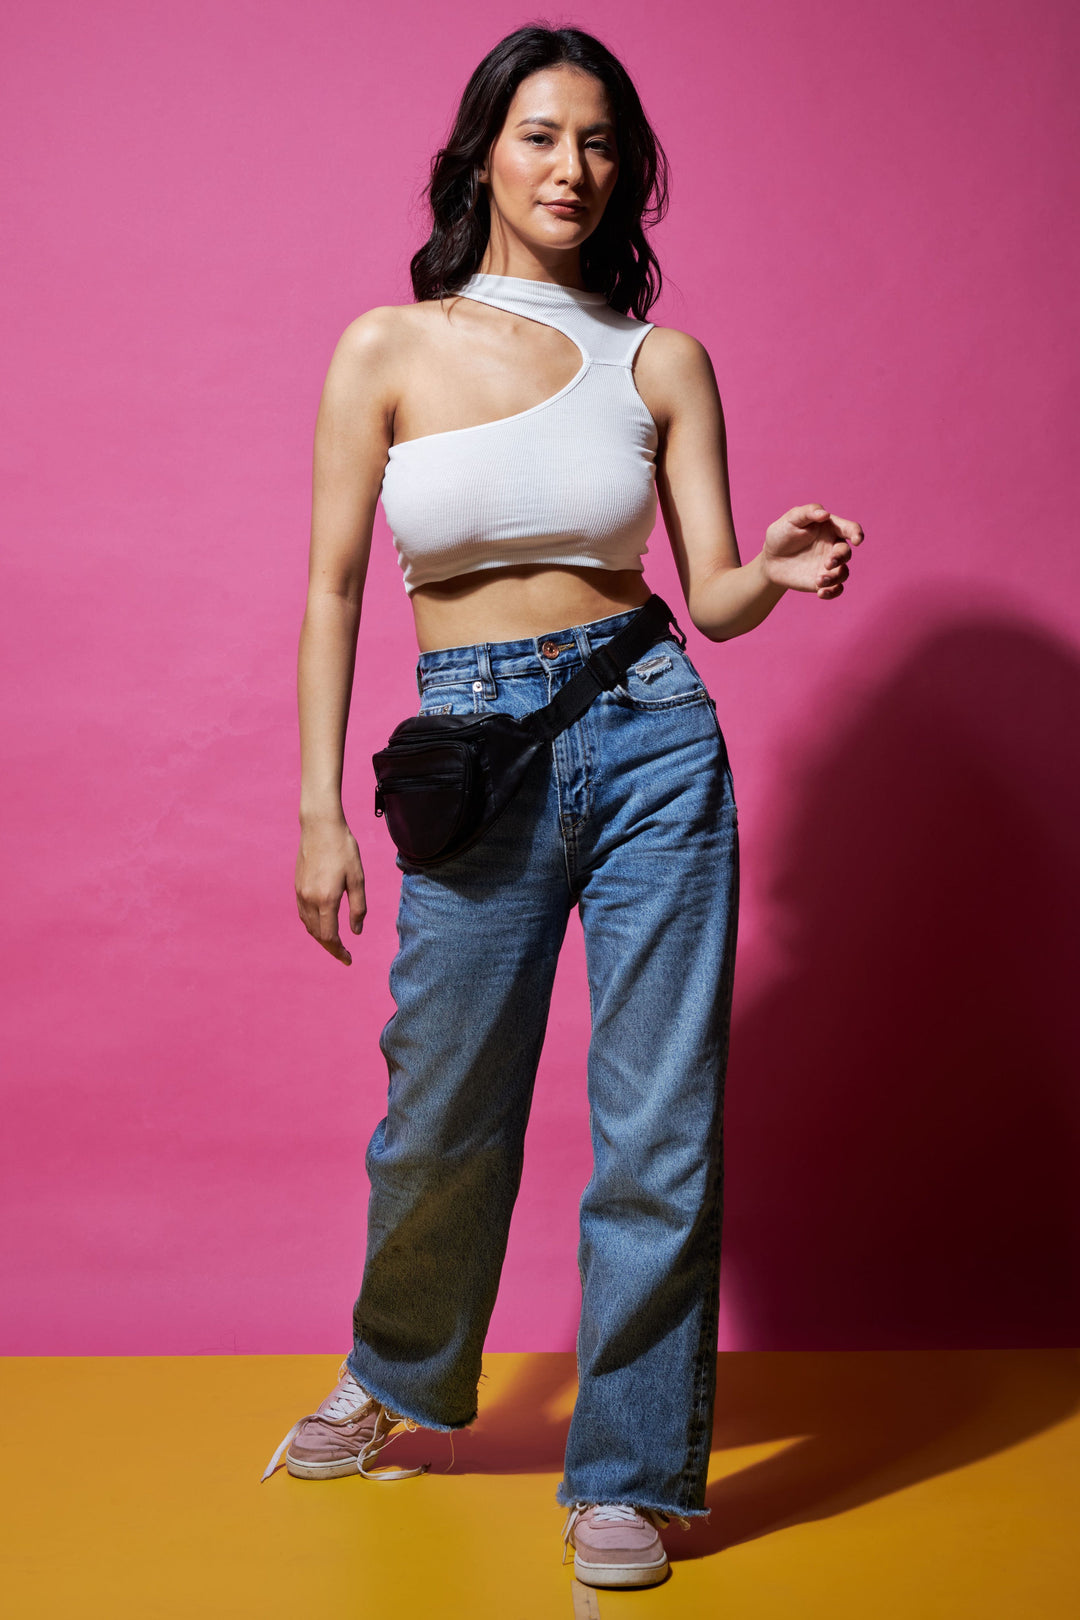 Out of the cut asymmetrical crop top